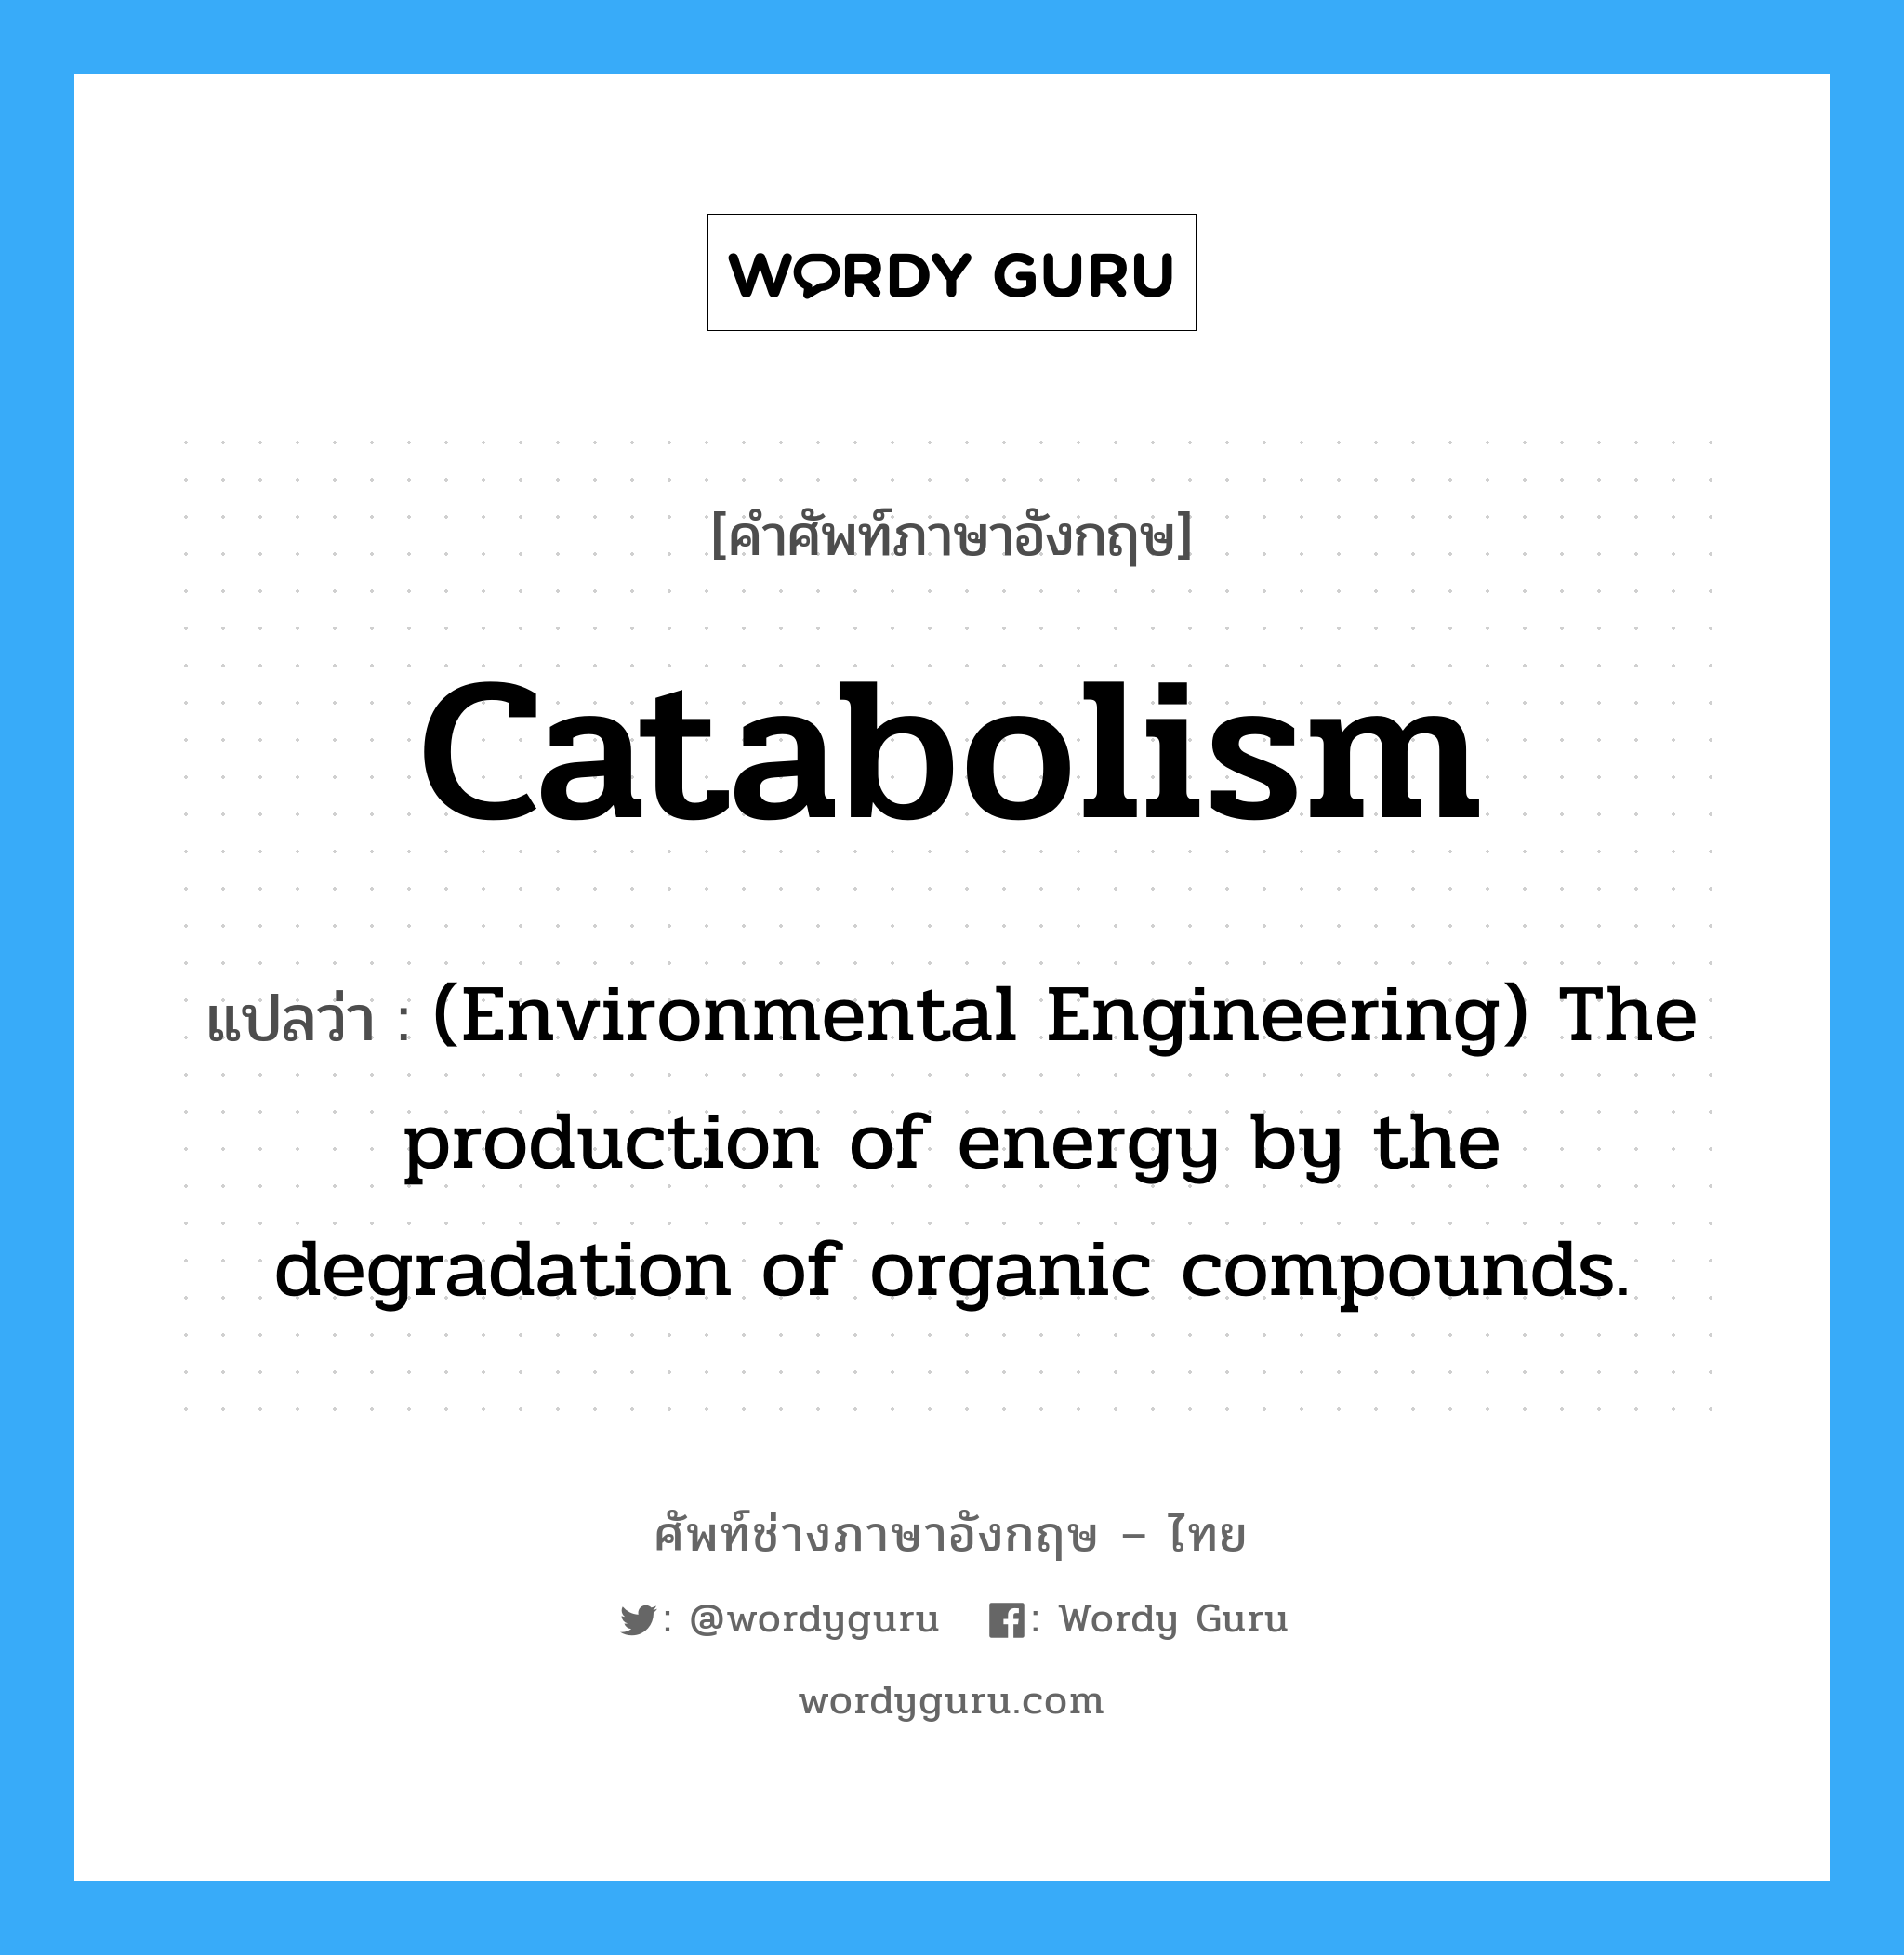 Catabolism แปลว่า?, คำศัพท์ช่างภาษาอังกฤษ - ไทย Catabolism คำศัพท์ภาษาอังกฤษ Catabolism แปลว่า (Environmental Engineering) The production of energy by the degradation of organic compounds.